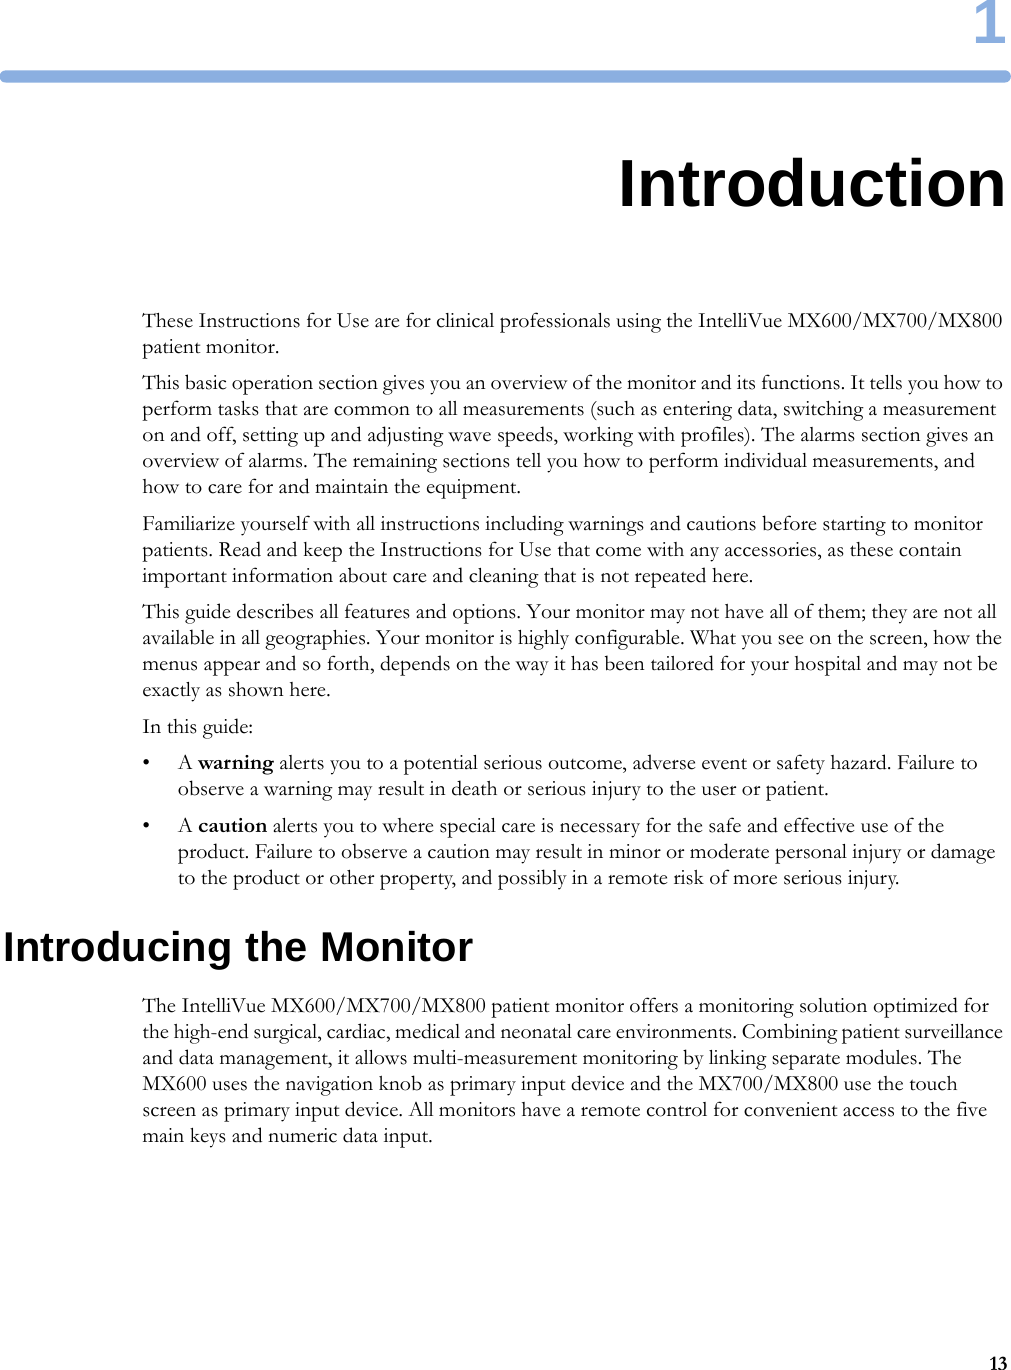 1131IntroductionThese Instructions for Use are for clinical professionals using the IntelliVue MX600/MX700/MX800 patient monitor.This basic operation section gives you an overview of the monitor and its functions. It tells you how to perform tasks that are common to all measurements (such as entering data, switching a measurement on and off, setting up and adjusting wave speeds, working with profiles). The alarms section gives an overview of alarms. The remaining sections tell you how to perform individual measurements, and how to care for and maintain the equipment.Familiarize yourself with all instructions including warnings and cautions before starting to monitor patients. Read and keep the Instructions for Use that come with any accessories, as these contain important information about care and cleaning that is not repeated here.This guide describes all features and options. Your monitor may not have all of them; they are not all available in all geographies. Your monitor is highly configurable. What you see on the screen, how the menus appear and so forth, depends on the way it has been tailored for your hospital and may not be exactly as shown here.In this guide:•A warning alerts you to a potential serious outcome, adverse event or safety hazard. Failure to observe a warning may result in death or serious injury to the user or patient.•A caution alerts you to where special care is necessary for the safe and effective use of the product. Failure to observe a caution may result in minor or moderate personal injury or damage to the product or other property, and possibly in a remote risk of more serious injury.Introducing the MonitorThe IntelliVue MX600/MX700/MX800 patient monitor offers a monitoring solution optimized for the high-end surgical, cardiac, medical and neonatal care environments. Combining patient surveillance and data management, it allows multi-measurement monitoring by linking separate modules. The MX600 uses the navigation knob as primary input device and the MX700/MX800 use the touch screen as primary input device. All monitors have a remote control for convenient access to the five main keys and numeric data input.